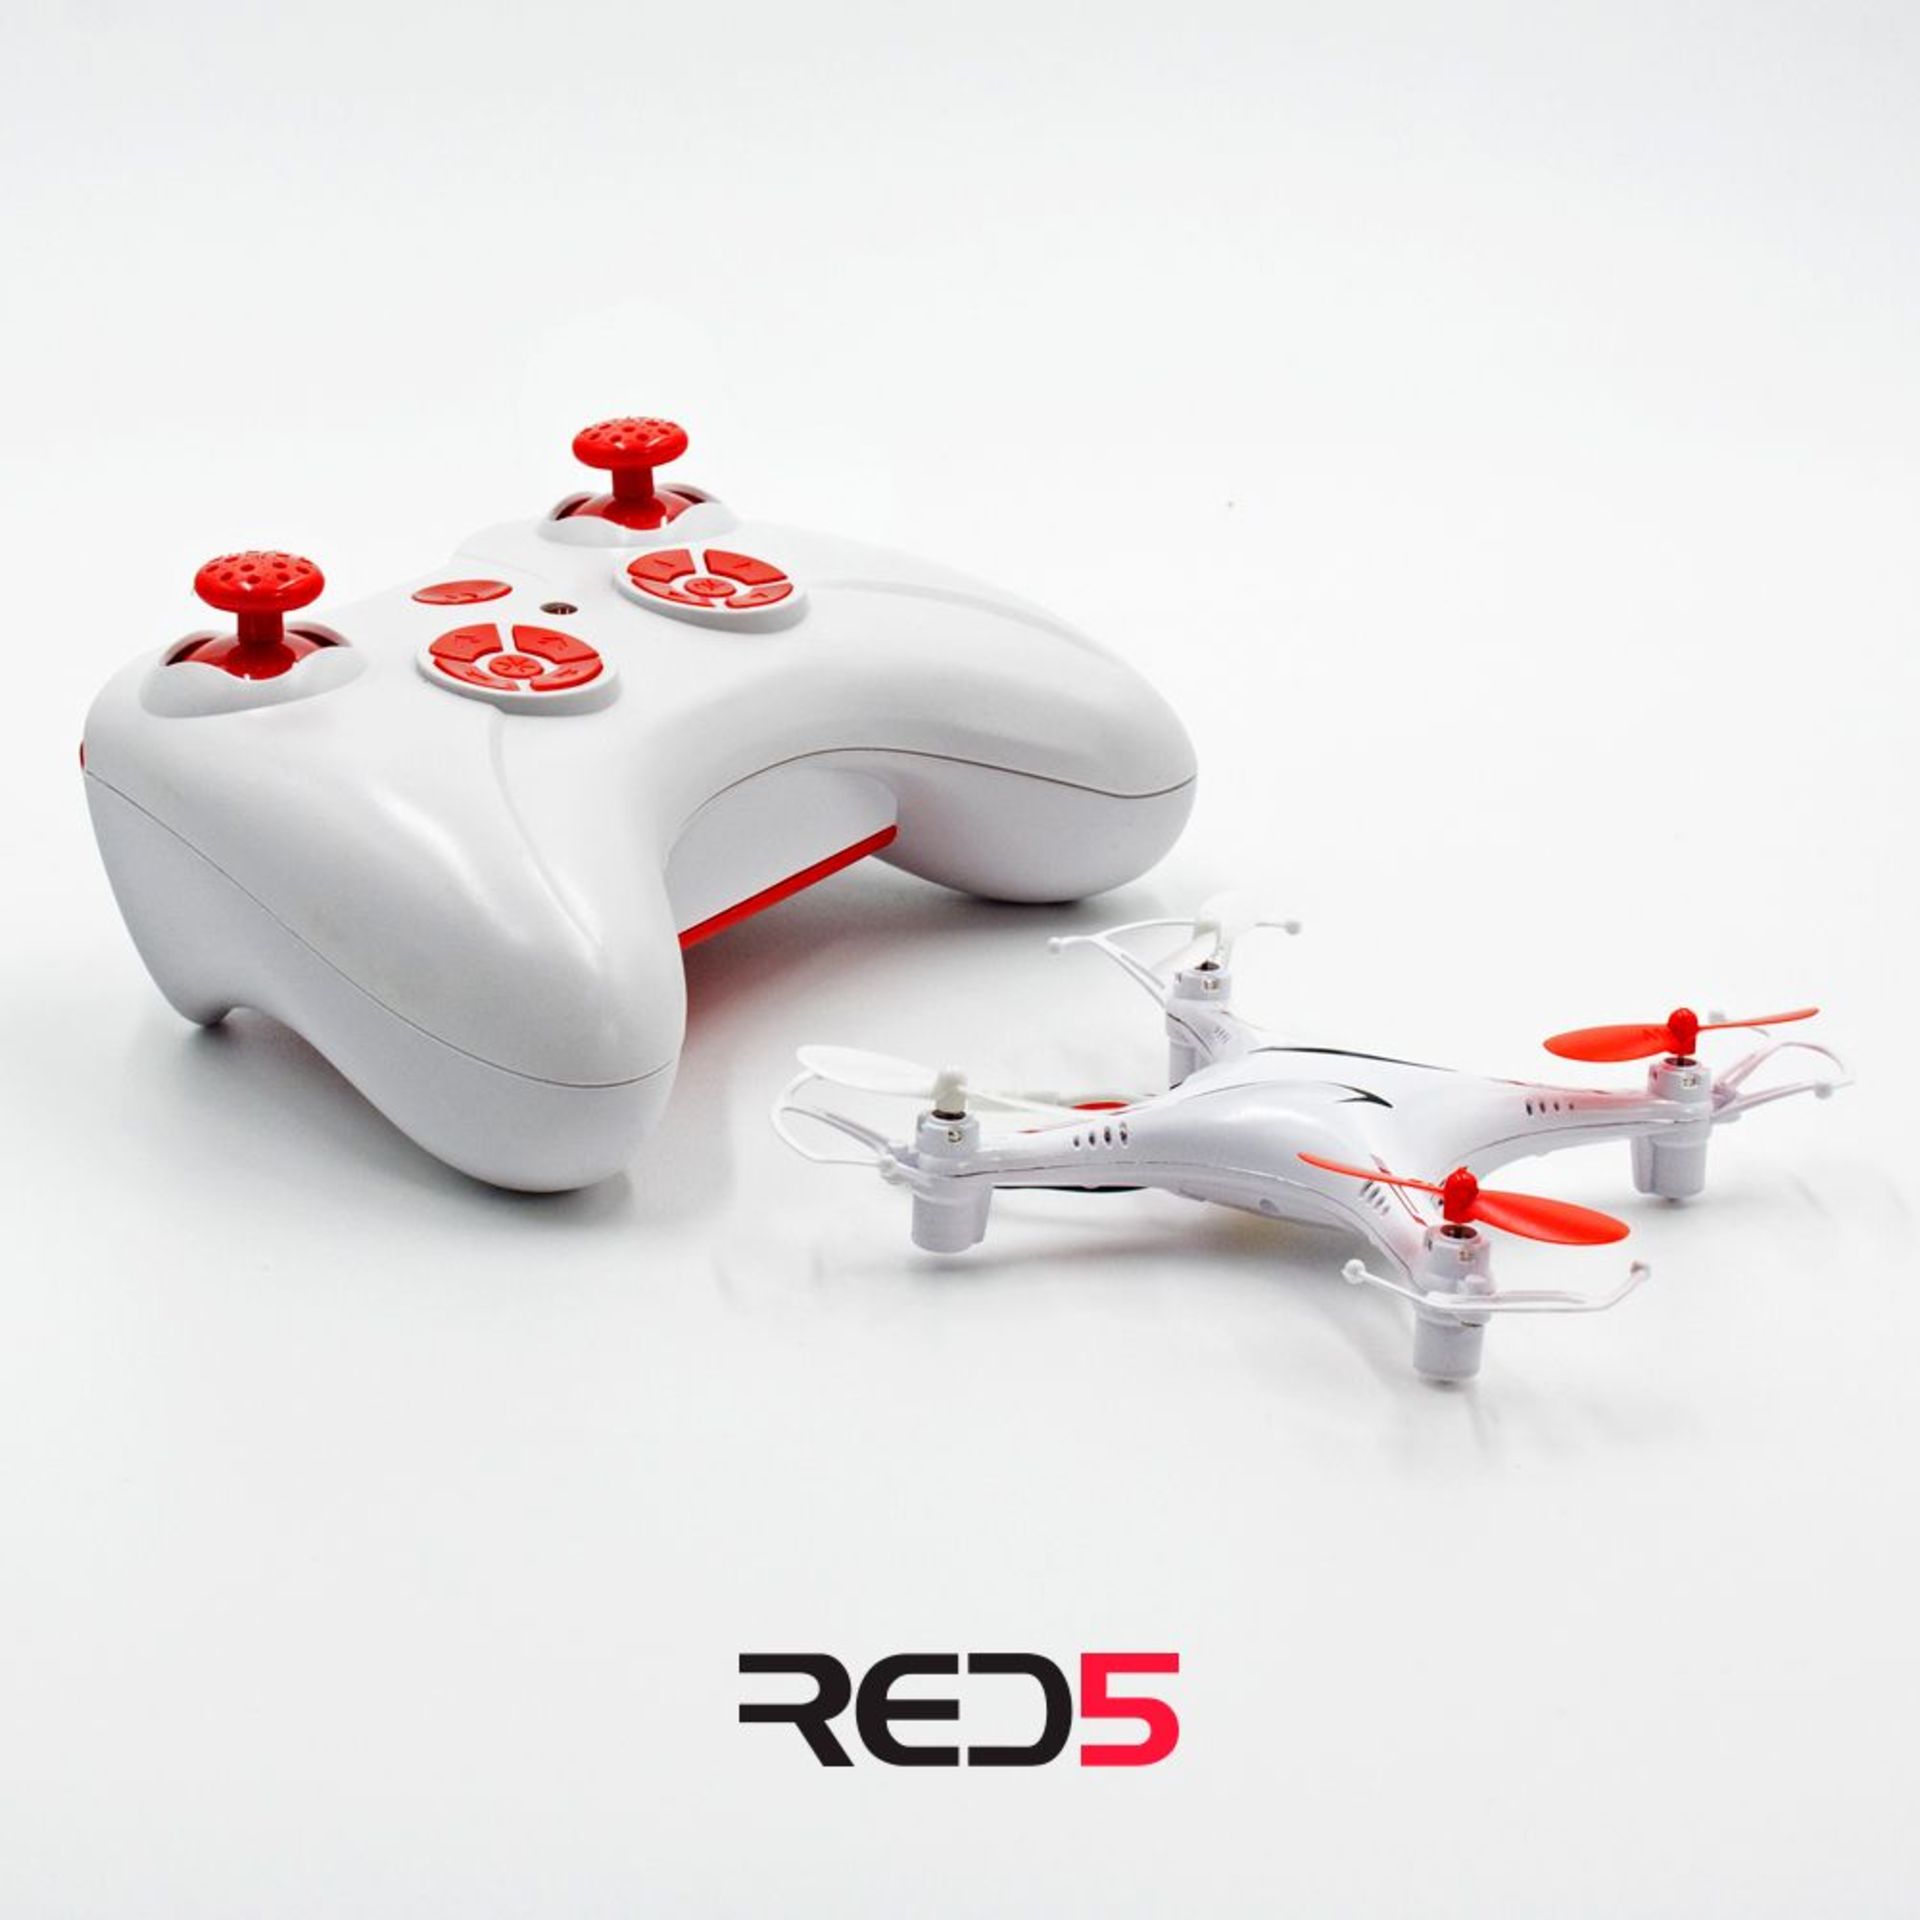 (R2F) 10x Red5 Nano Drone. (All With RTM Stickers)